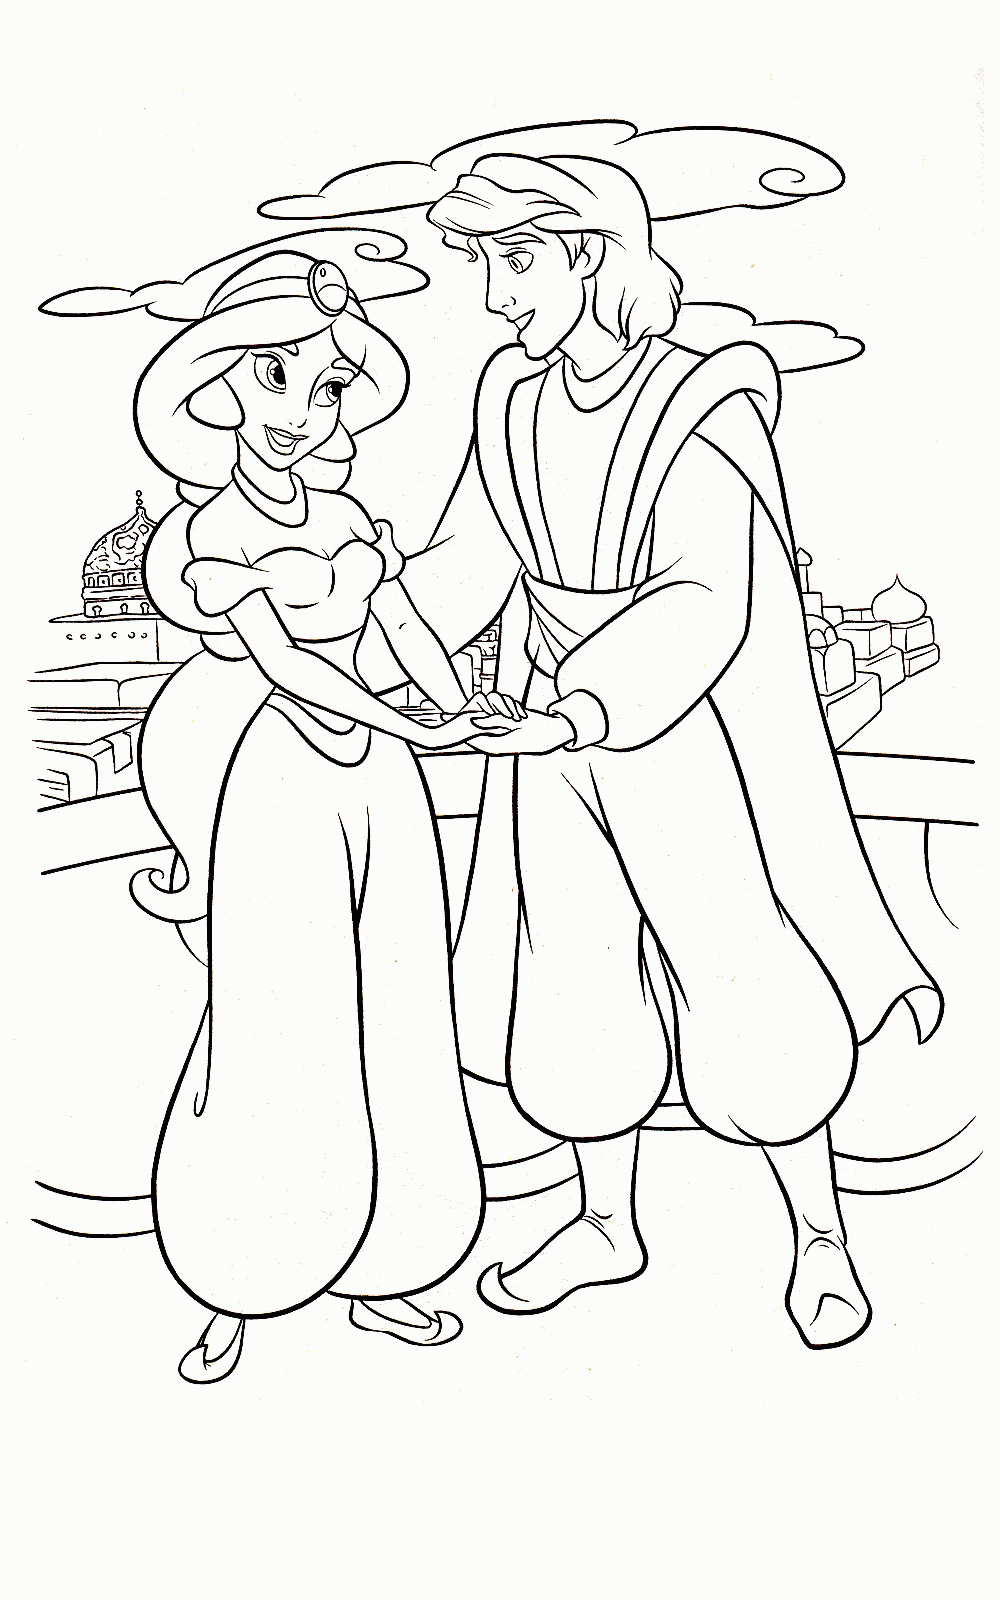 Jasmine and Aladdin Coloring Pages to print #5724 Jasmine and ...